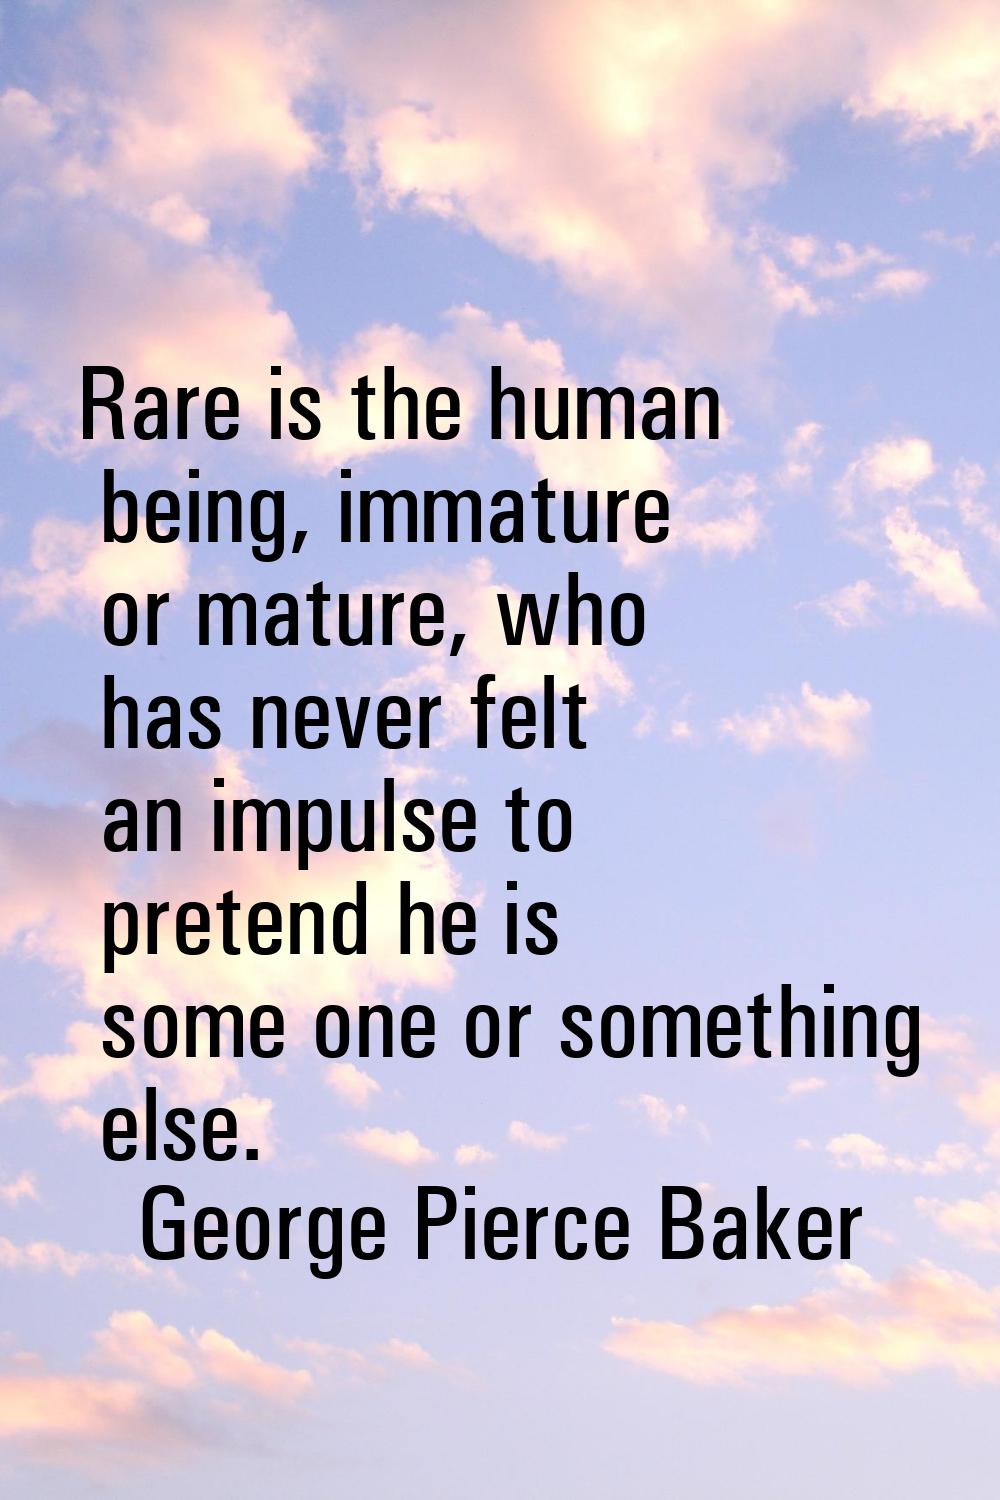 Rare is the human being, immature or mature, who has never felt an impulse to pretend he is some on